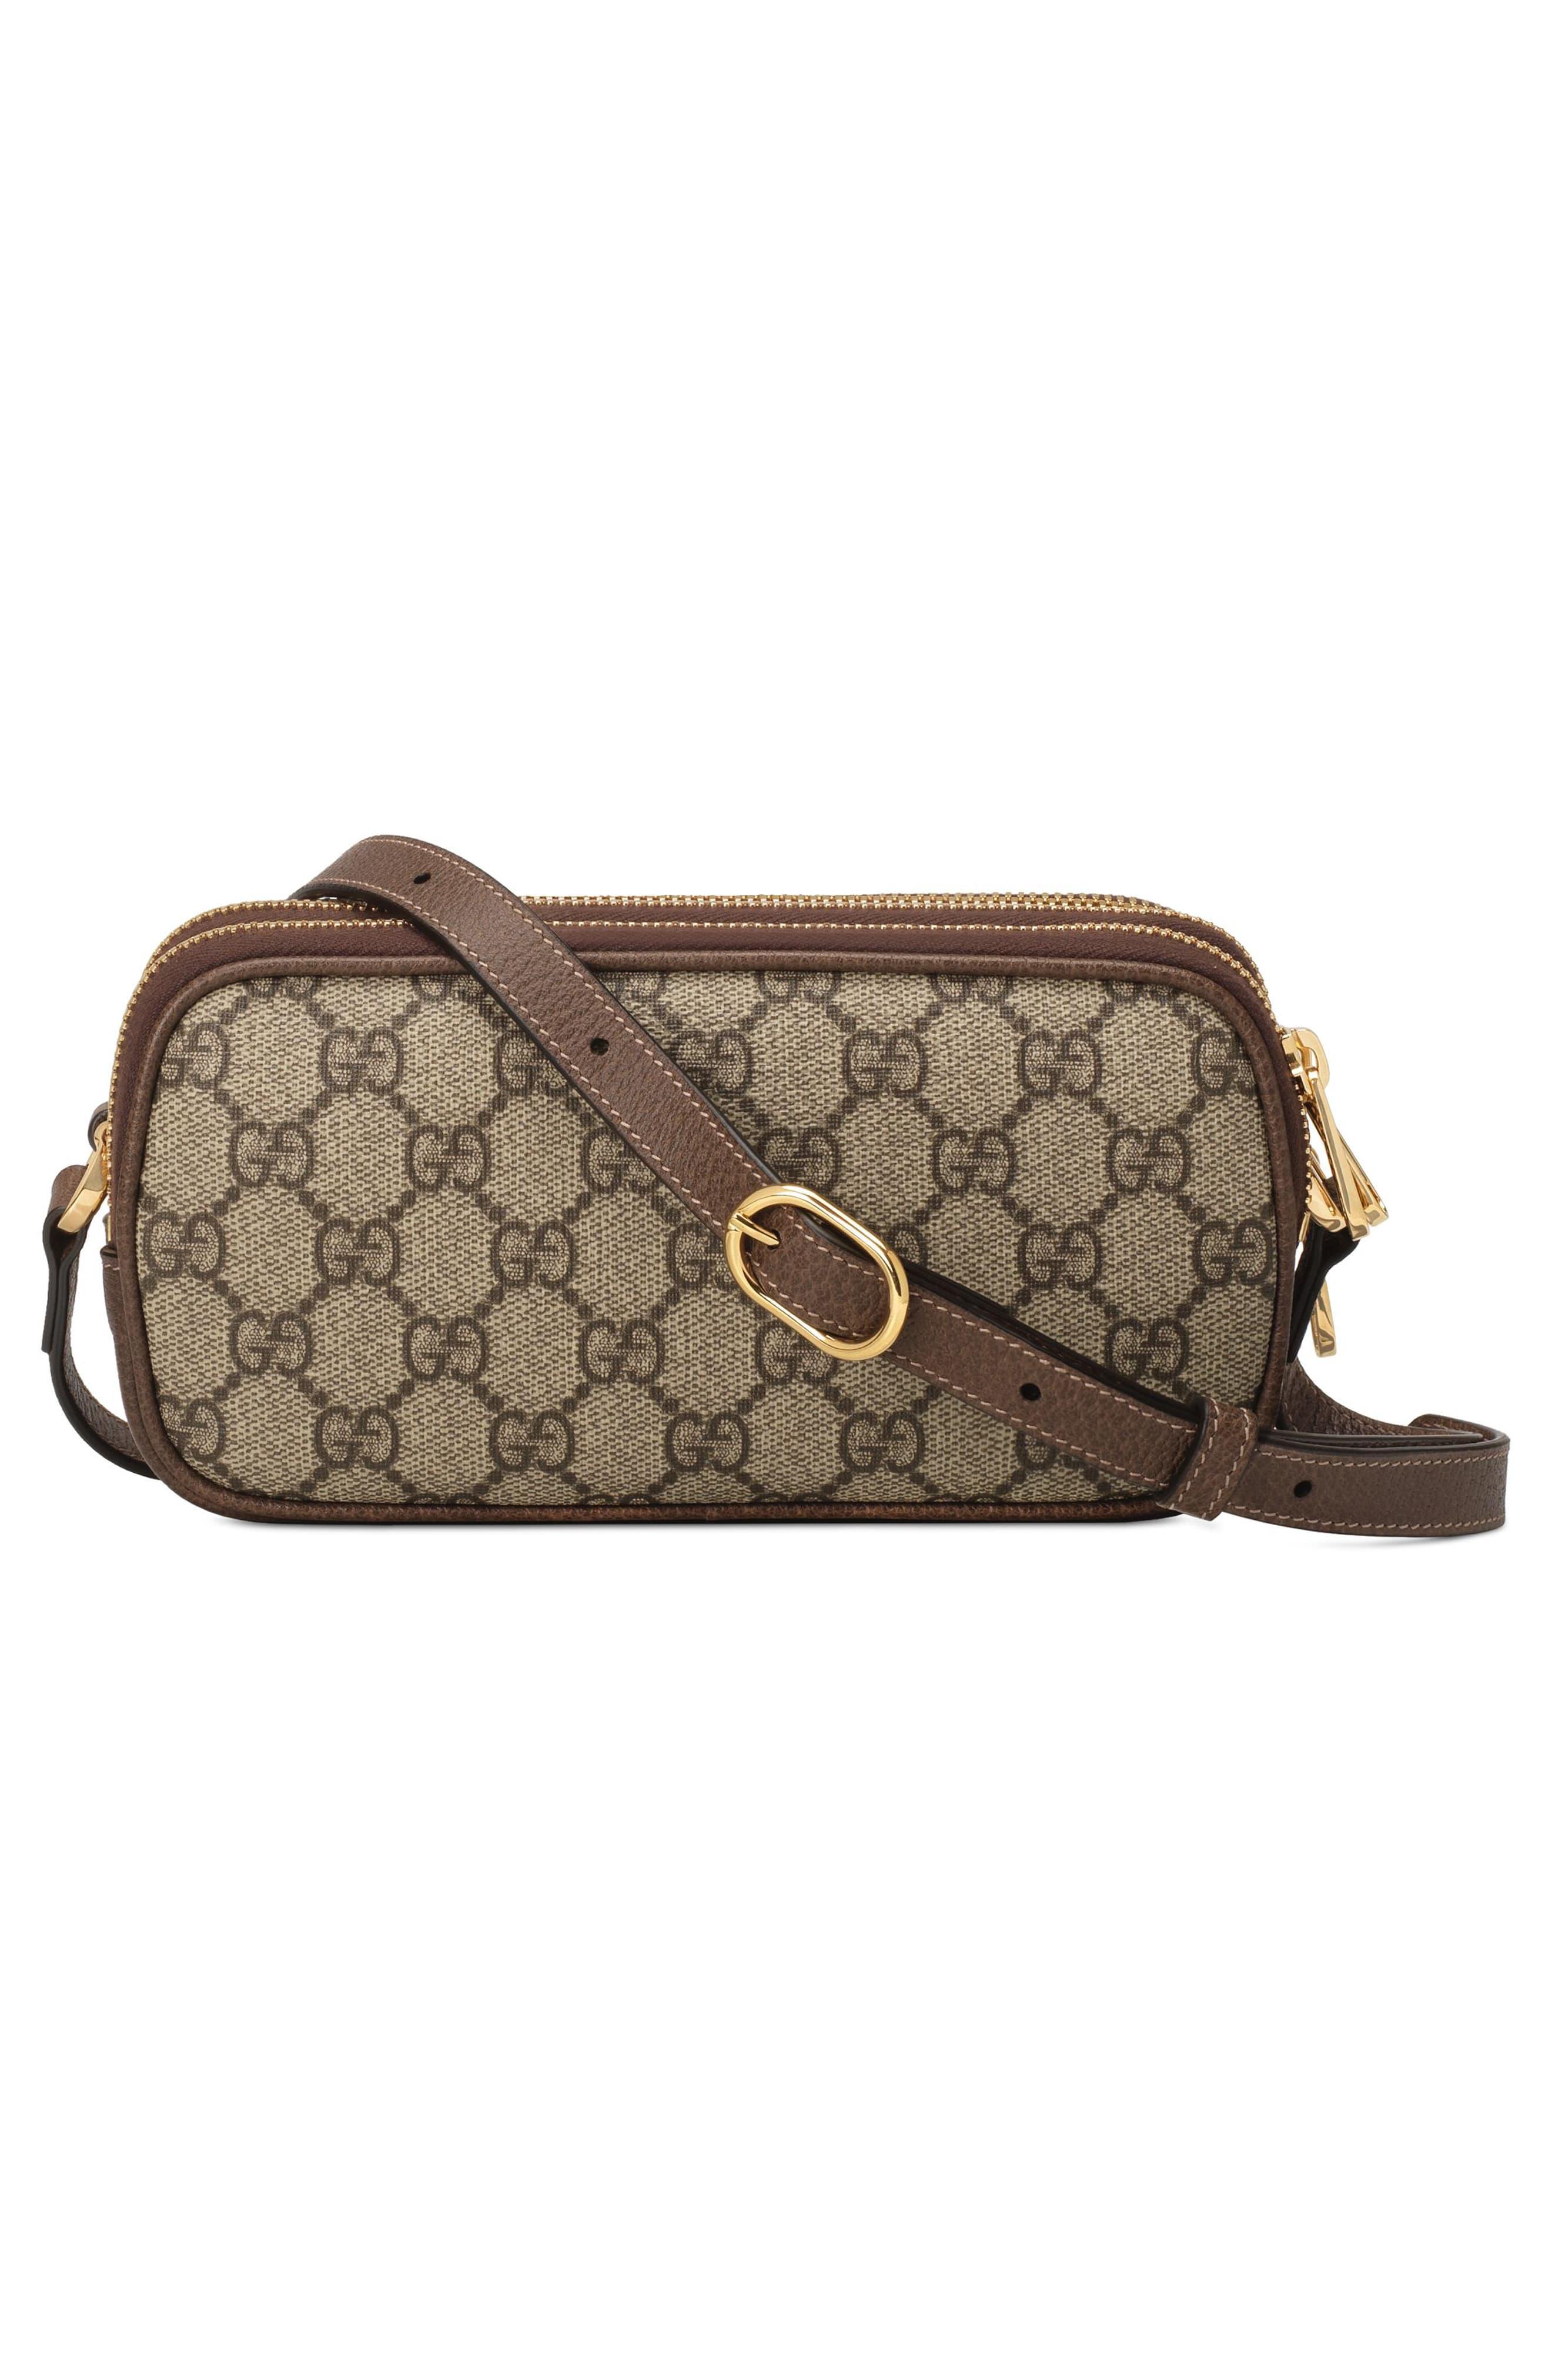 Gucci Leather Mini Ophidia Gg Supreme Canvas Crossbody Bag in Light Beige (Natural) - Lyst